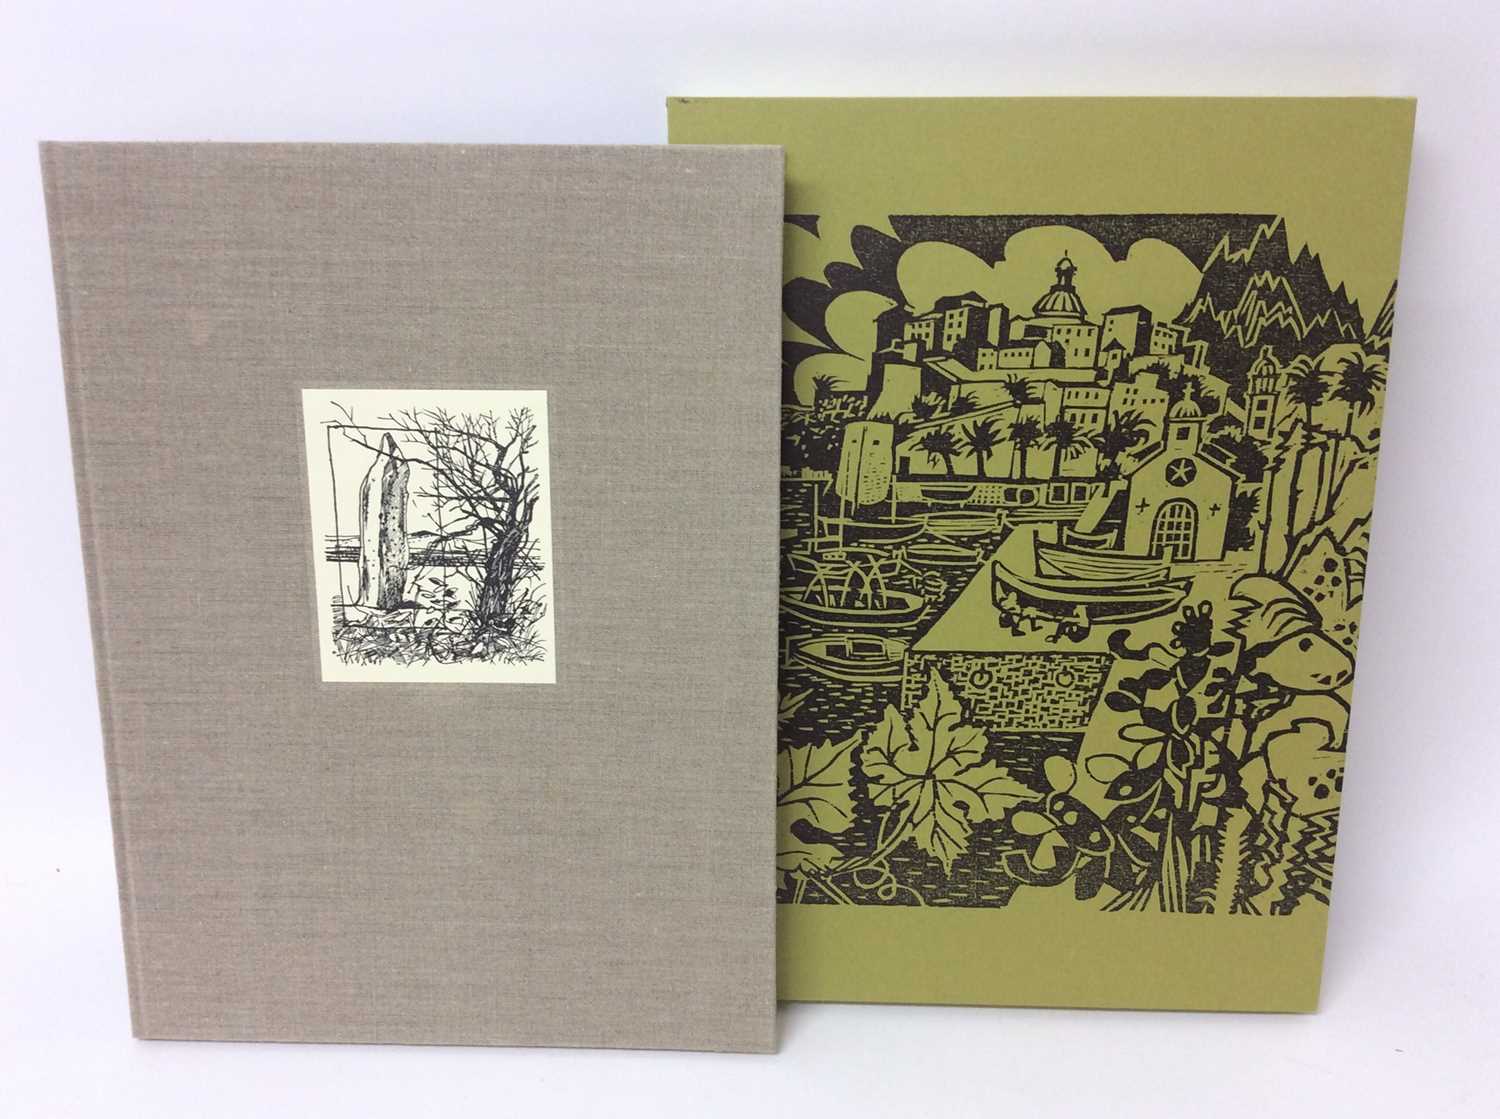 Lot 111 - The Old Stile Press - Rigby Graham. Kippers and Sawdust, limited signed edition, 1992, folio in slip case, together with a box of other publications featuring the illustrations of Rigby Graham incl...